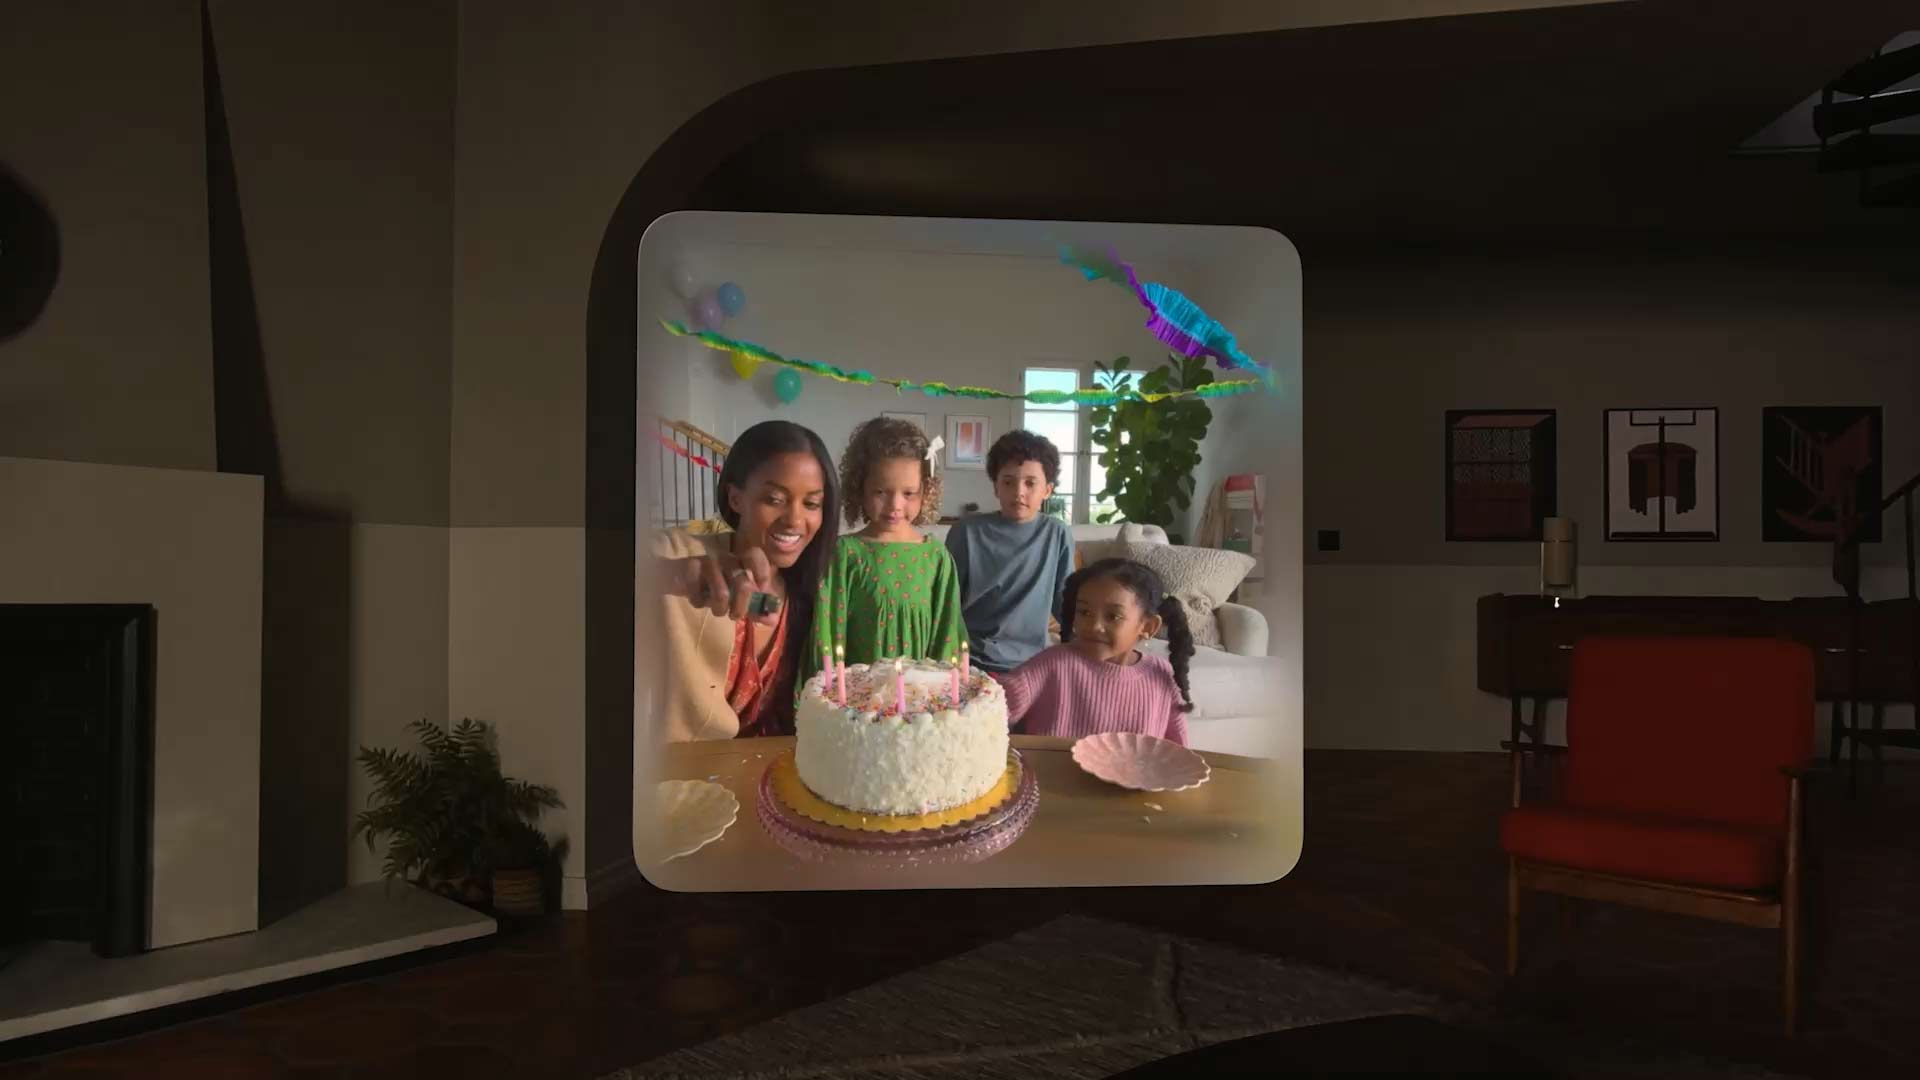 Apple Vision Pro Will Soon Let You Convert 2D Photos to 3D & Share Them Live via SharePlay